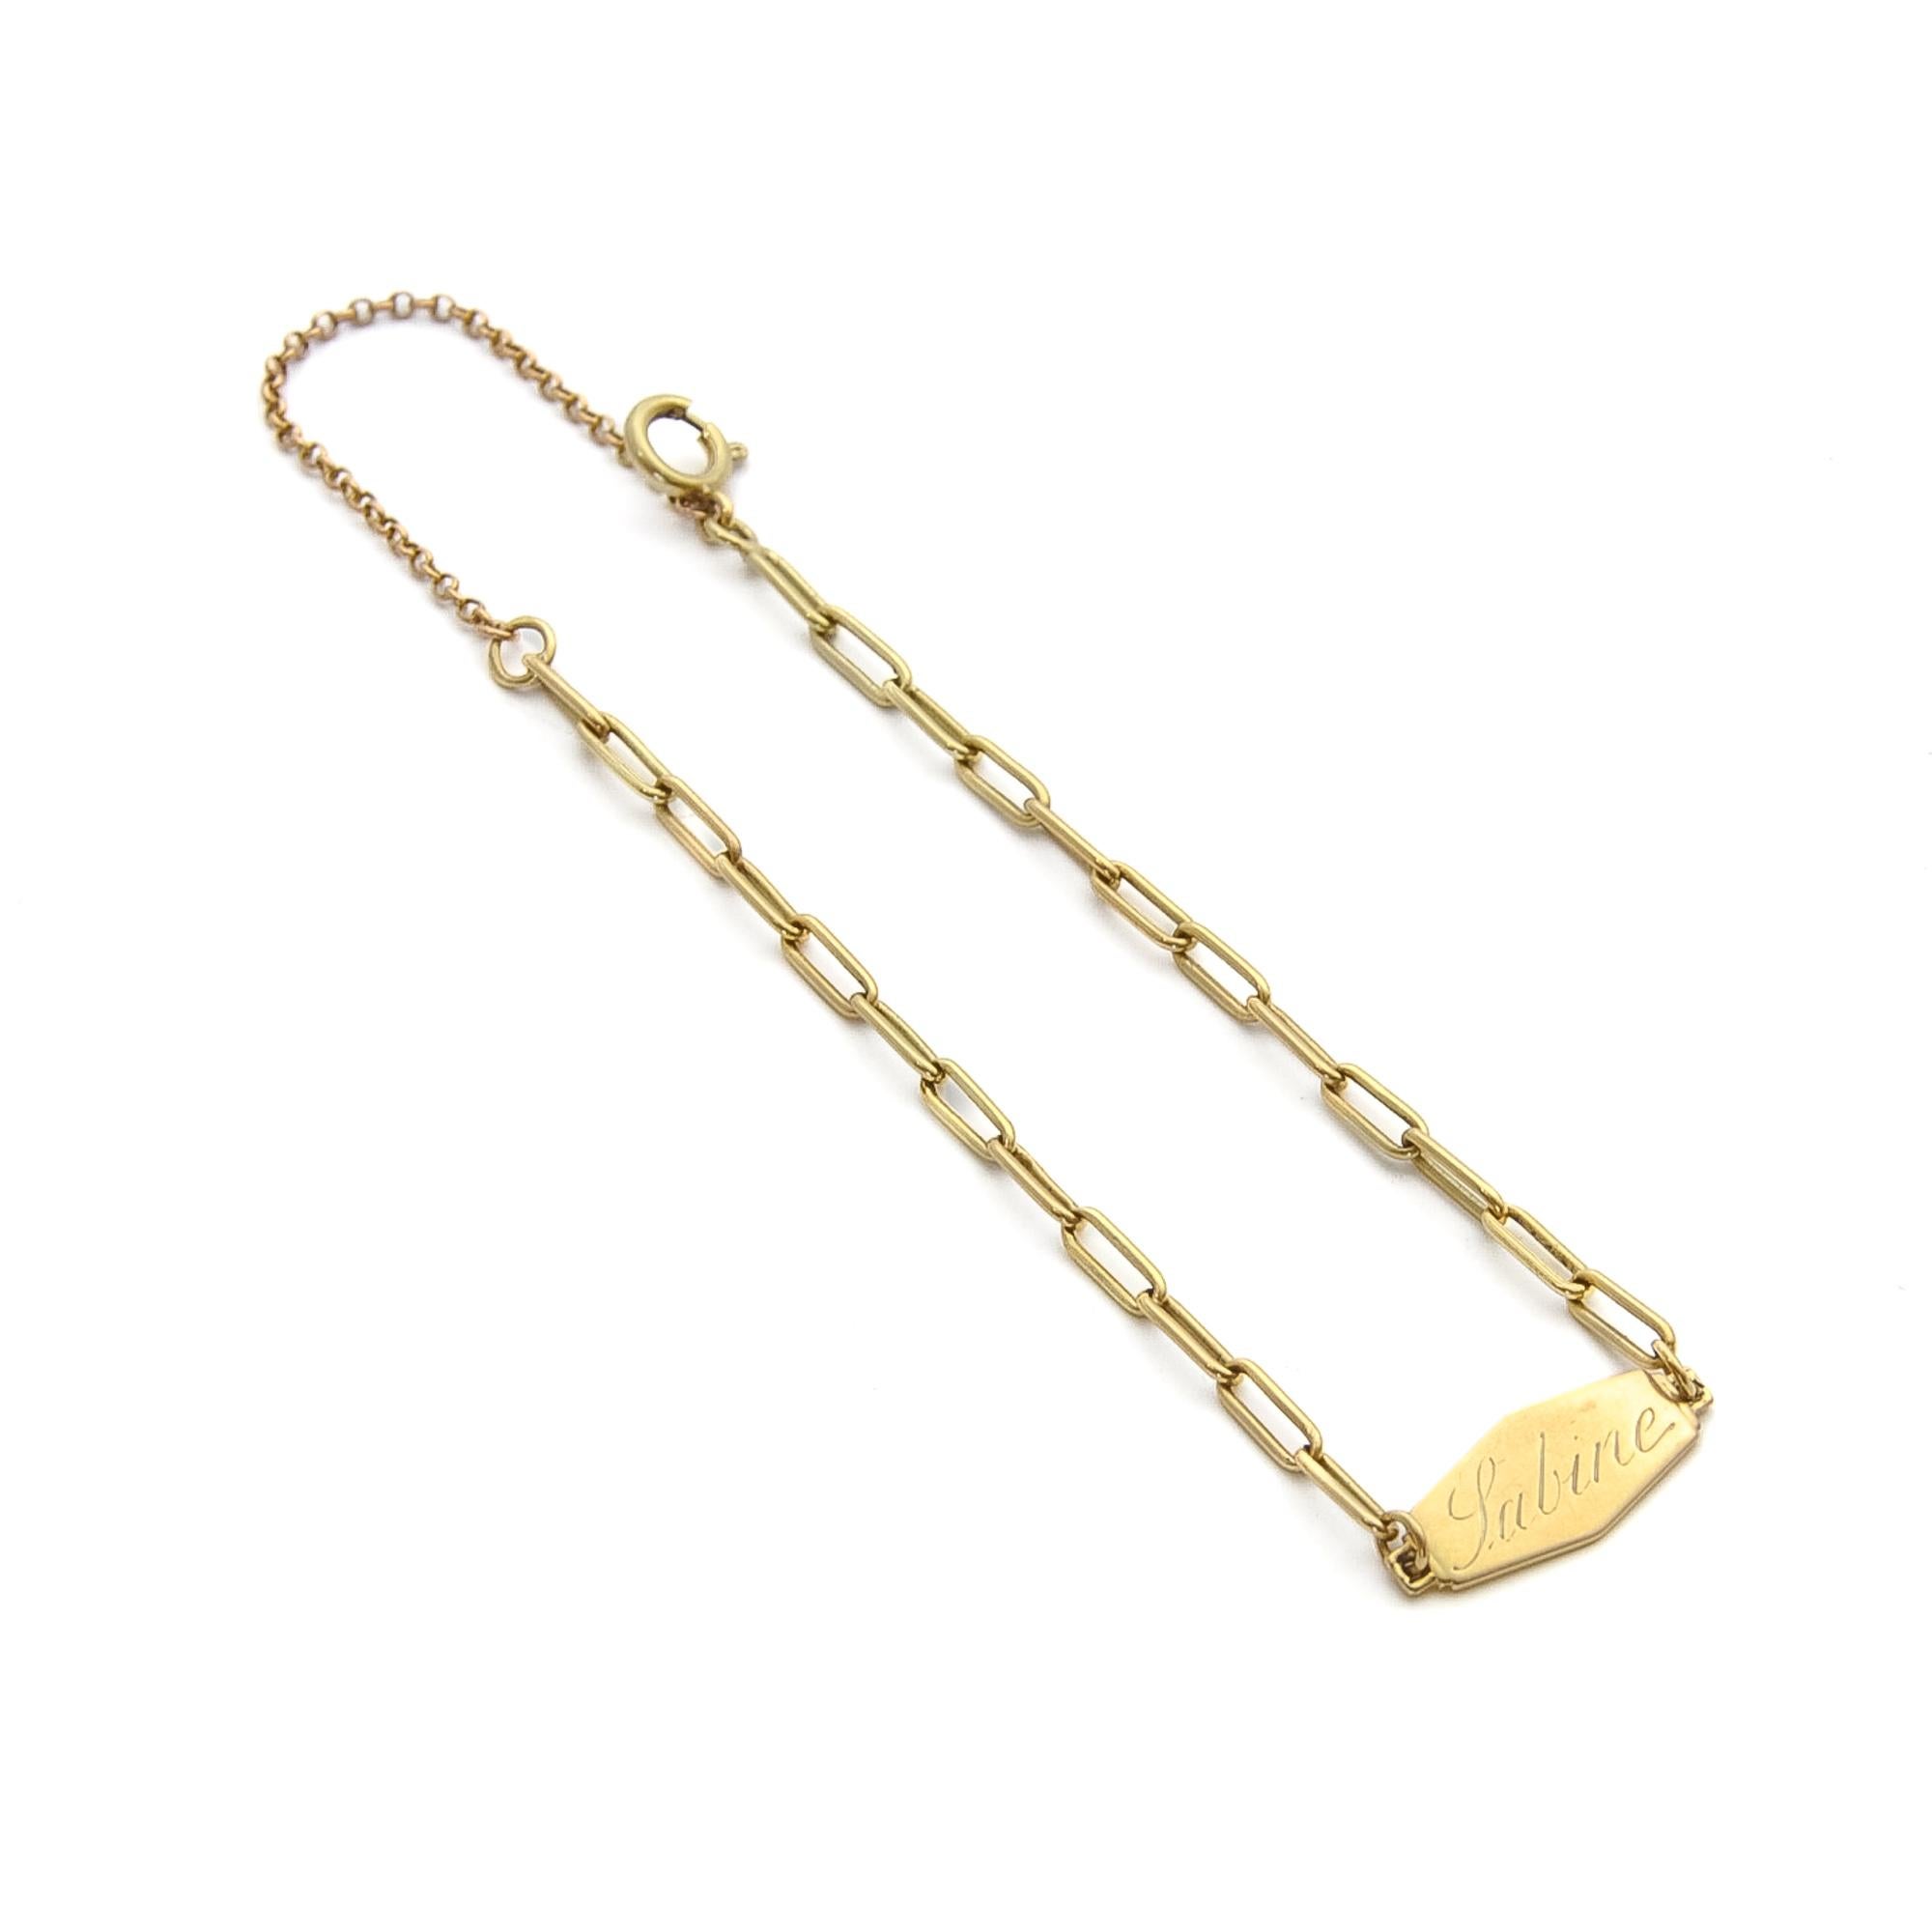 Vintage 14 Karat Gold Clasping Link Bracelet In Good Condition For Sale In Rotterdam, NL